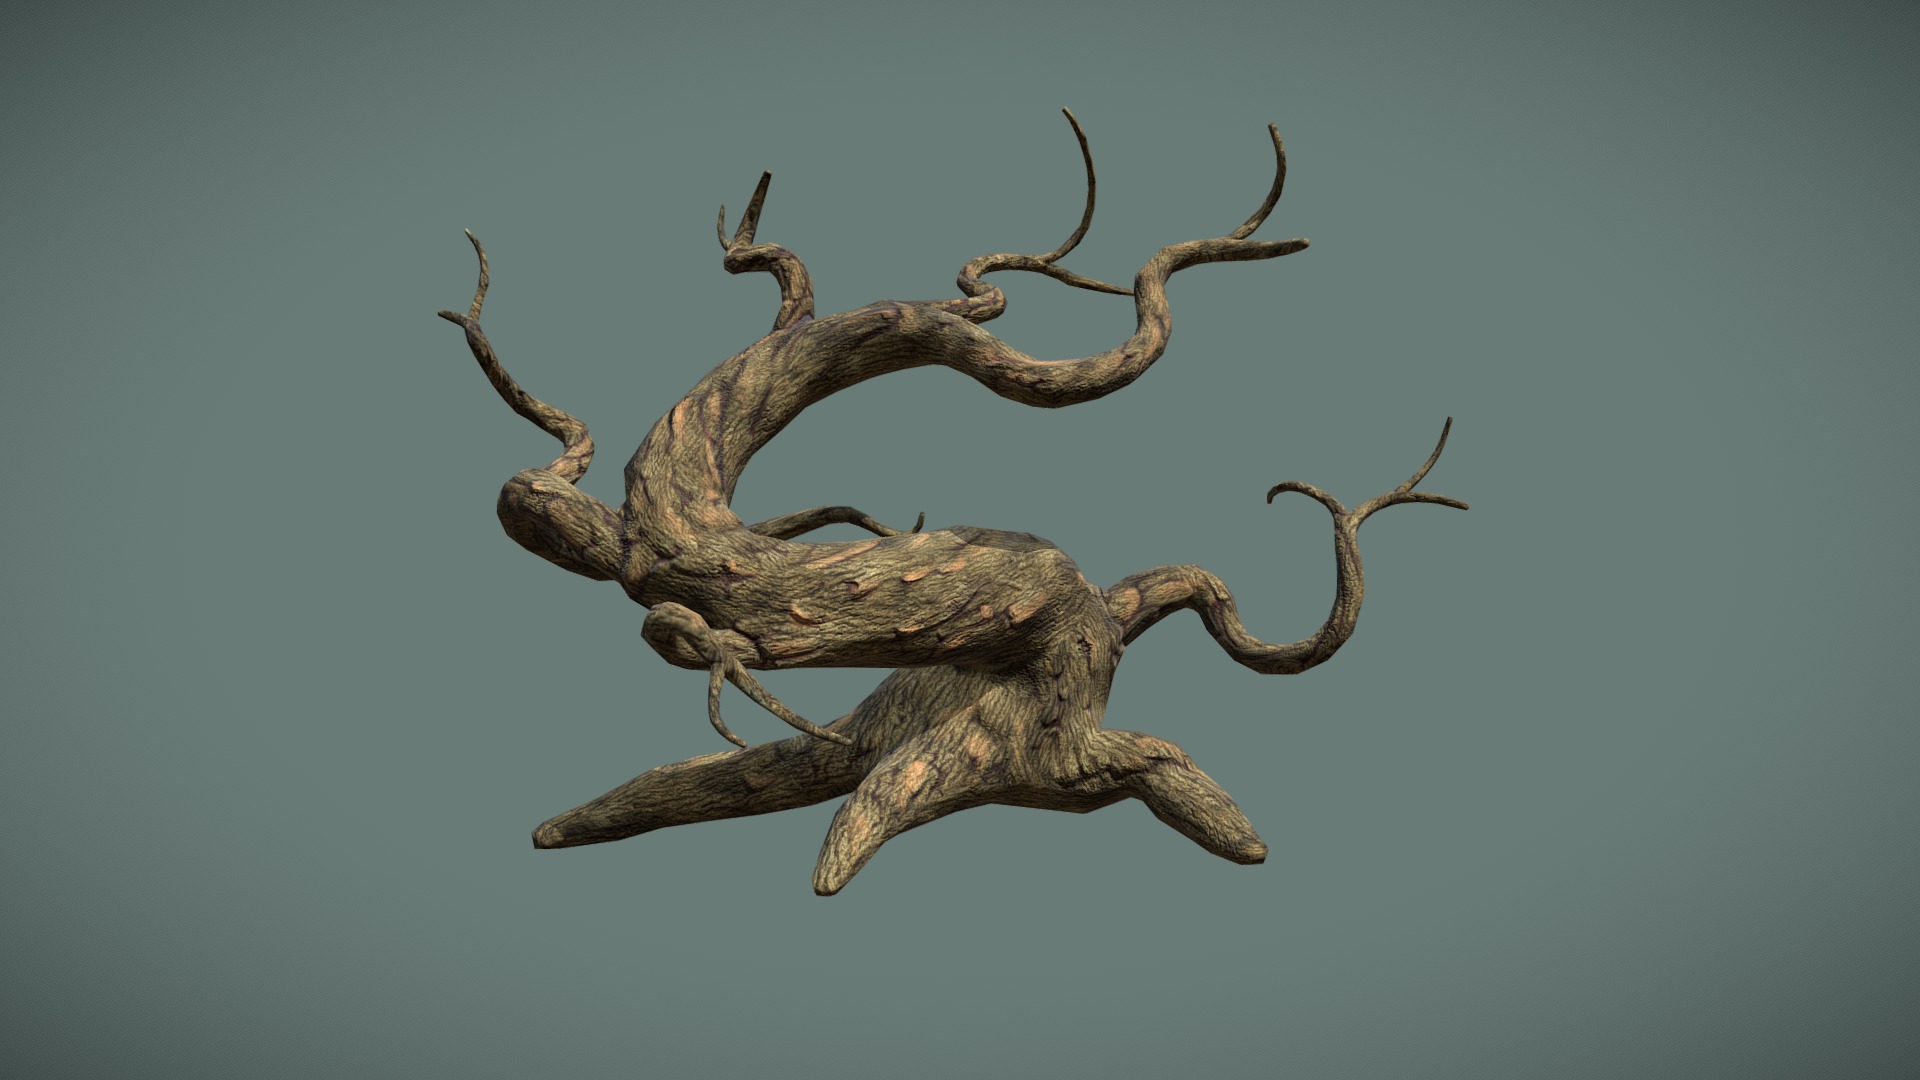 3D model Tree without foliage - This is a 3D model of the Tree without foliage. The 3D model is about a large elk with antlers.